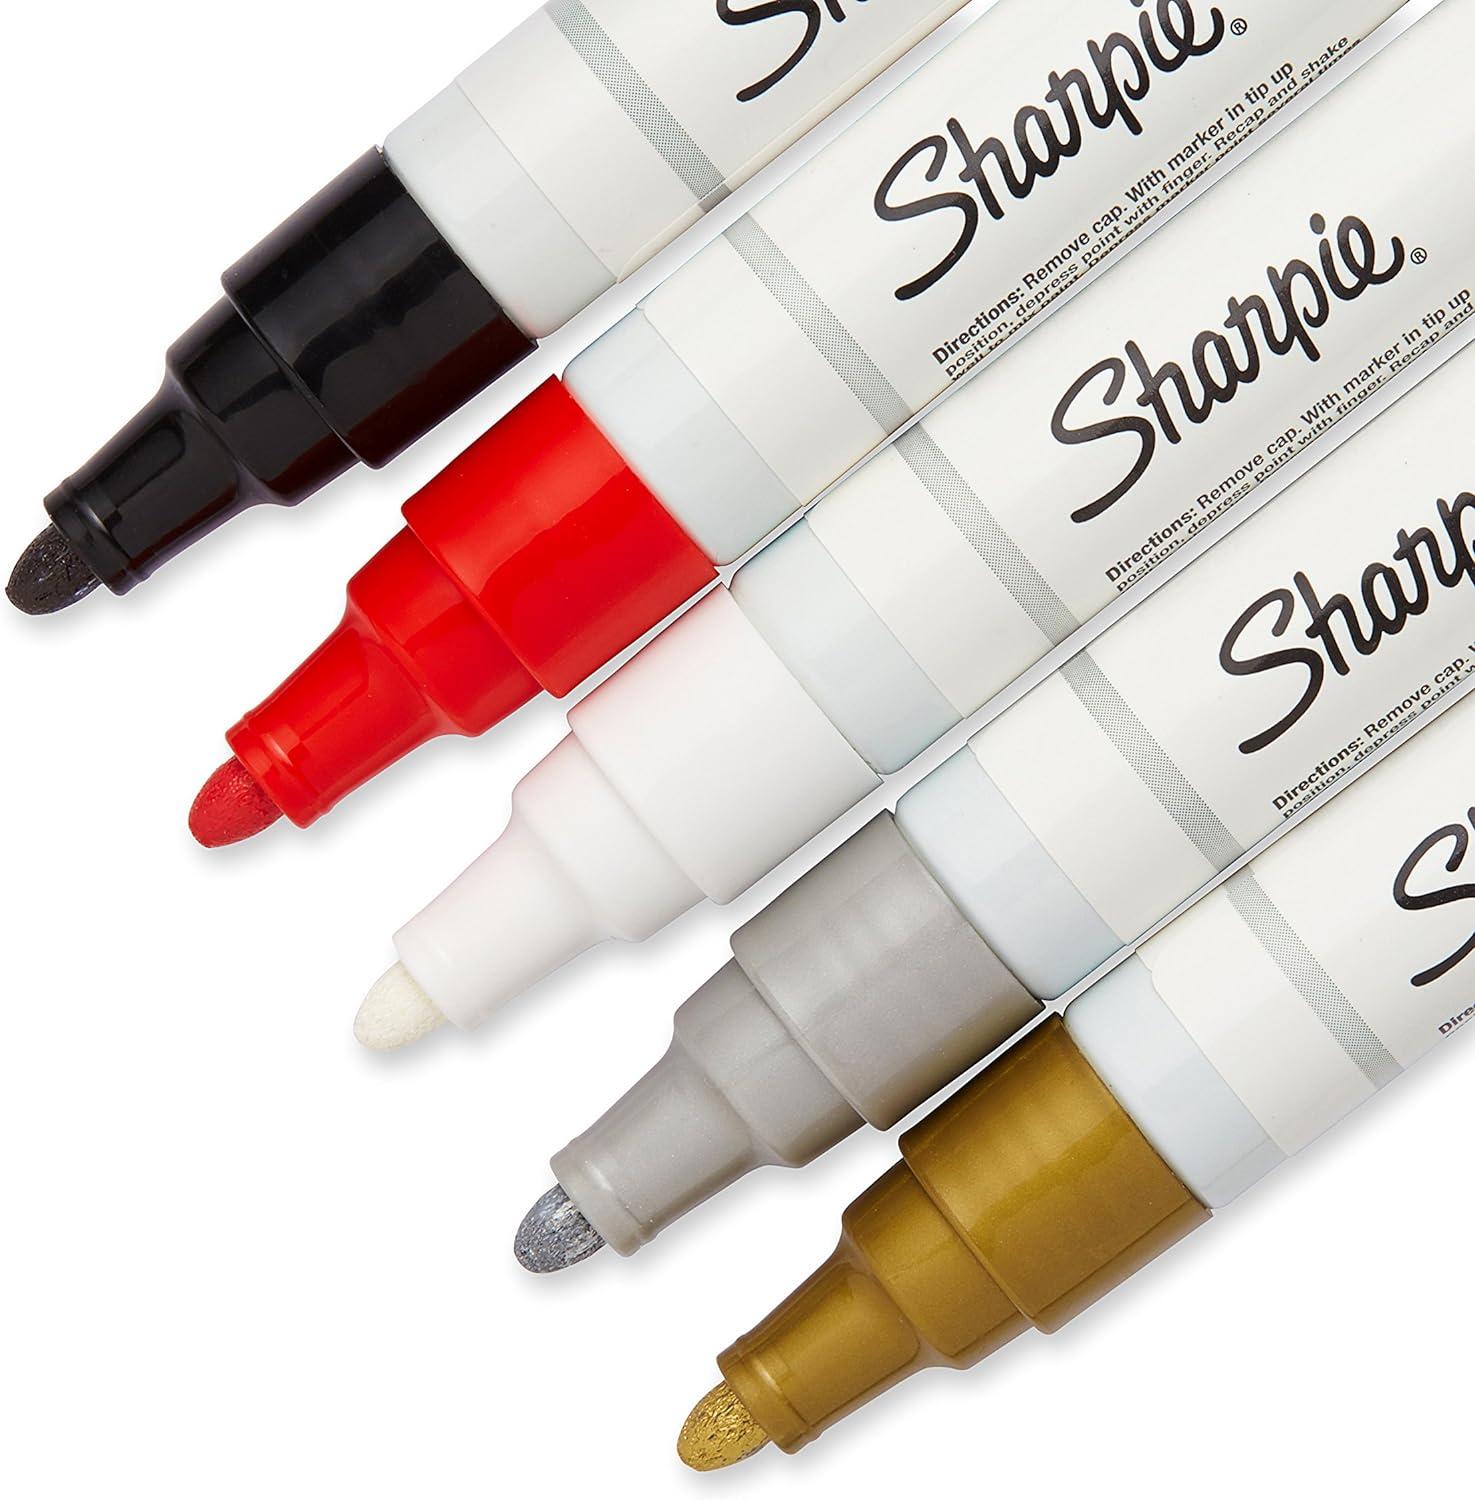 Sharpie Oil-Based Paint Markers, Fine Point, 5 Count